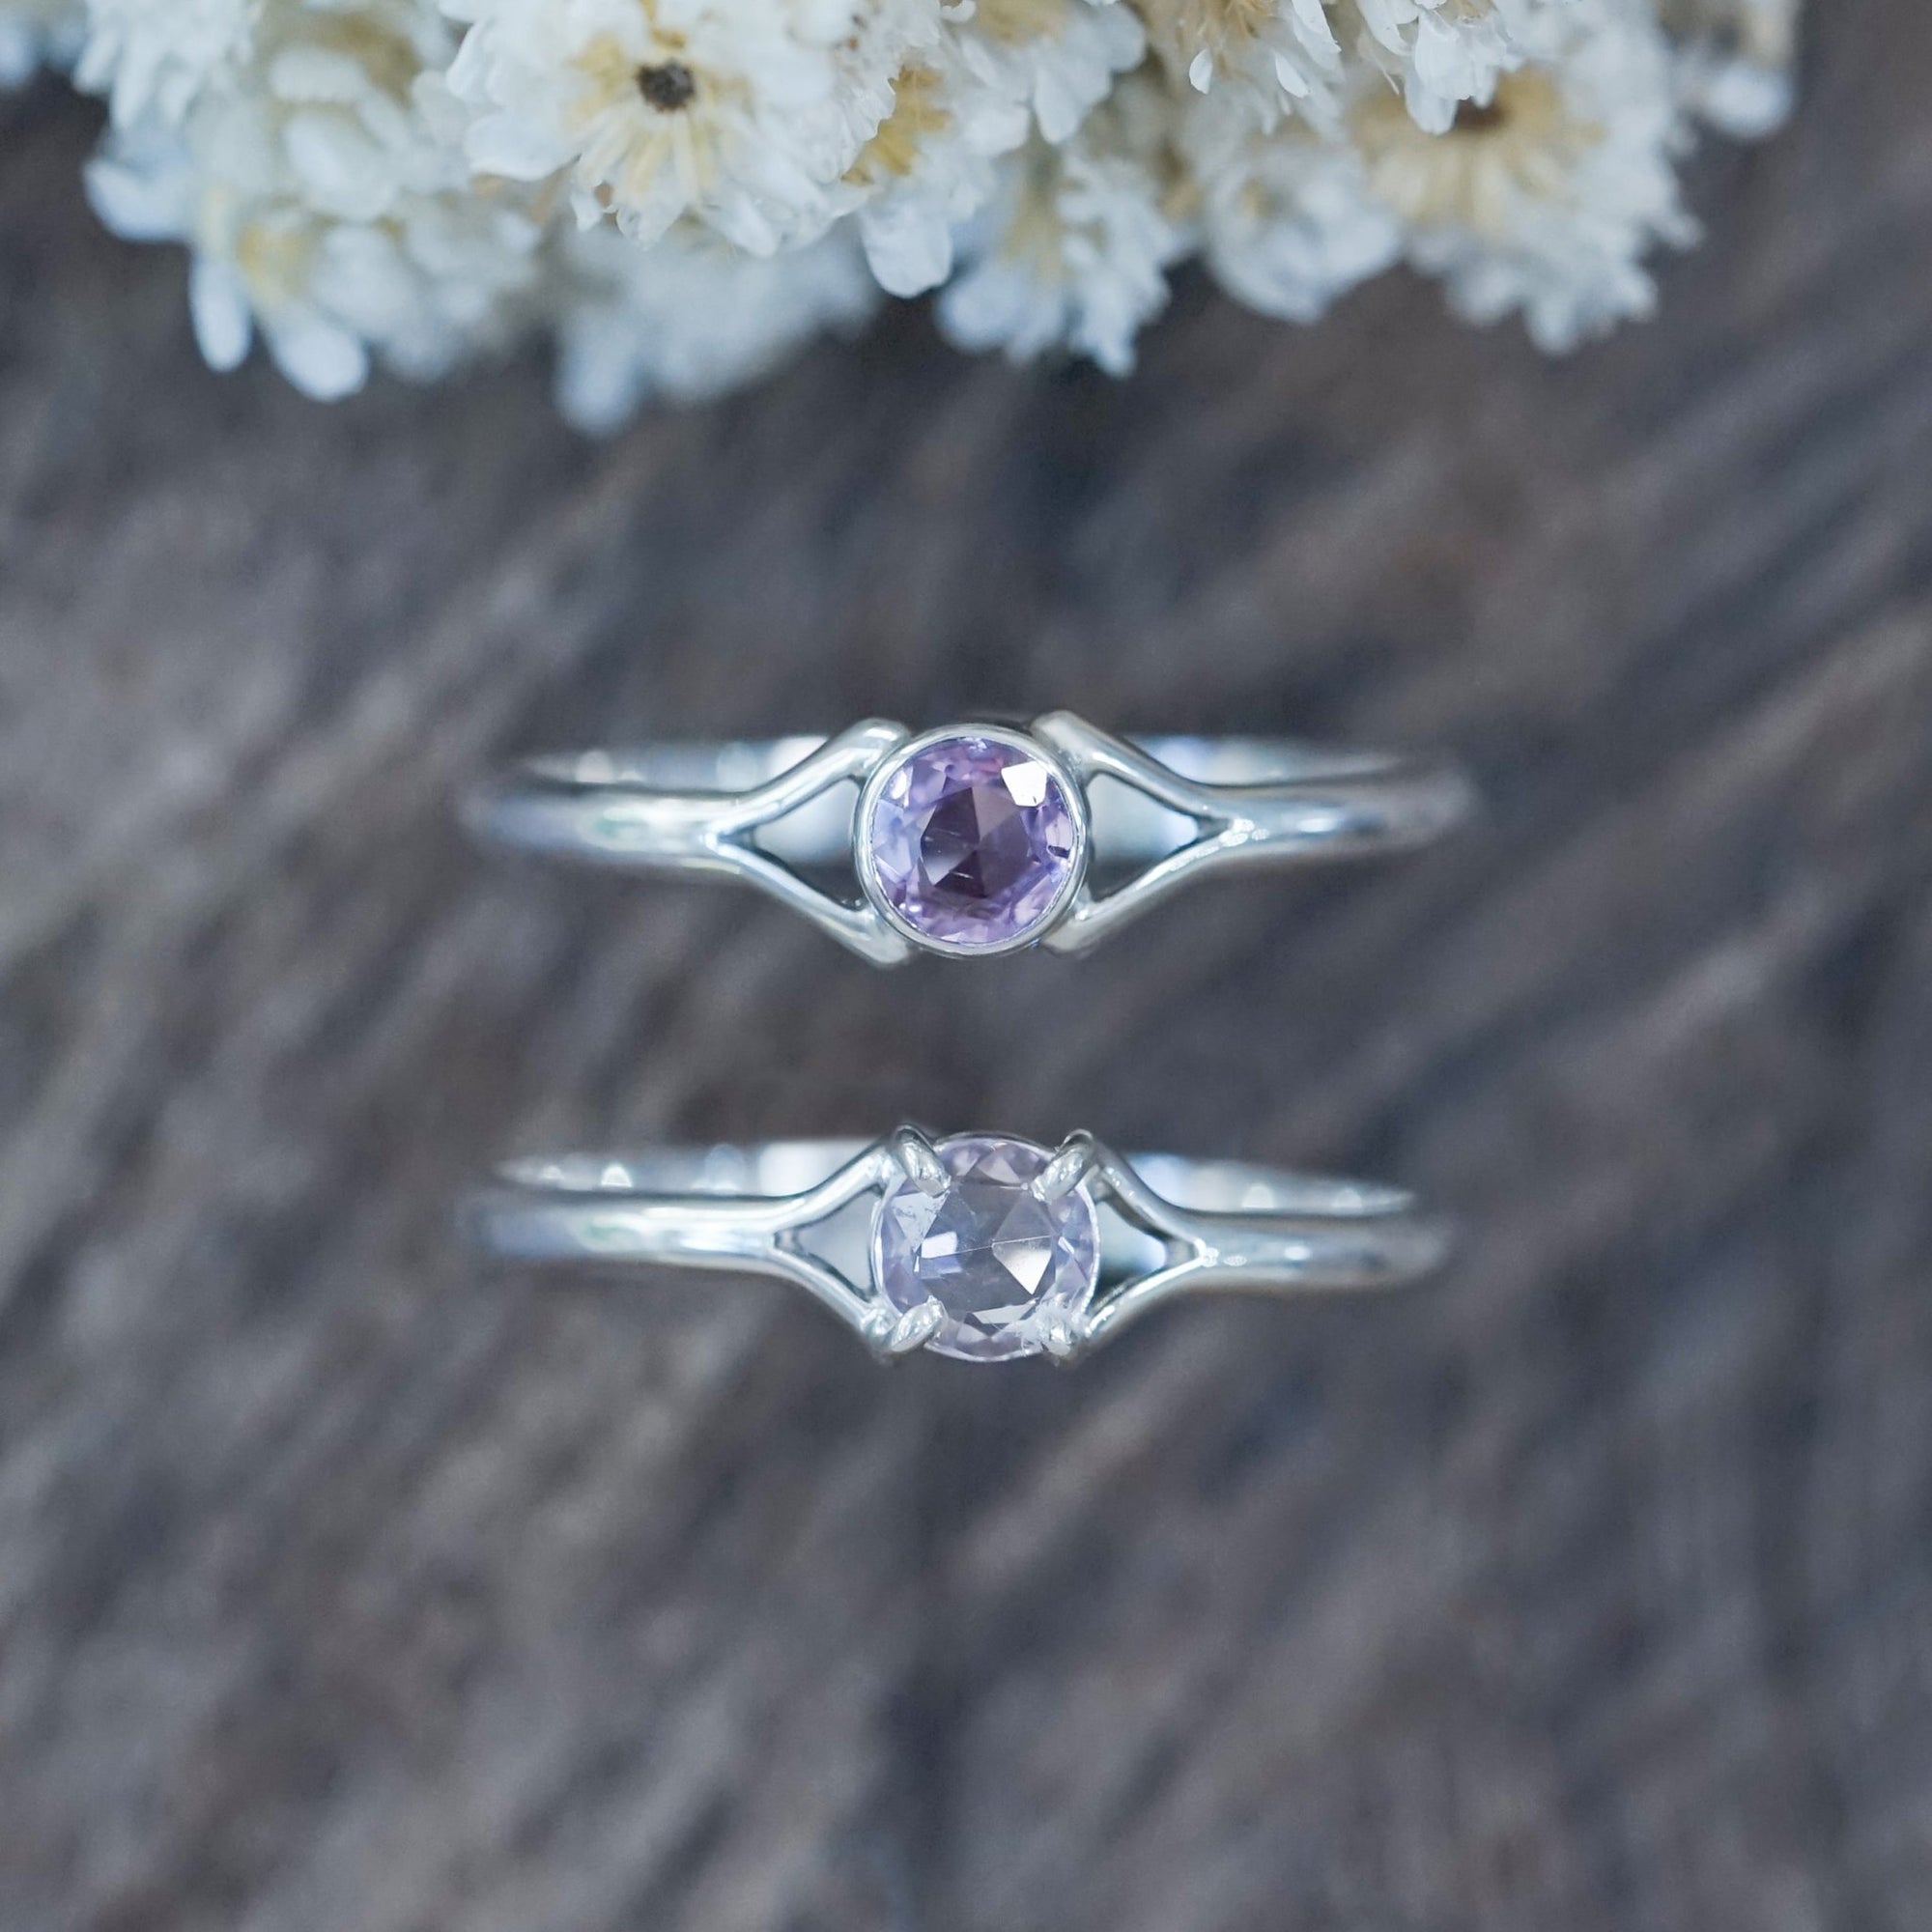 Rose Cut Sapphire Ring - Gardens of the Sun | Ethical Jewelry